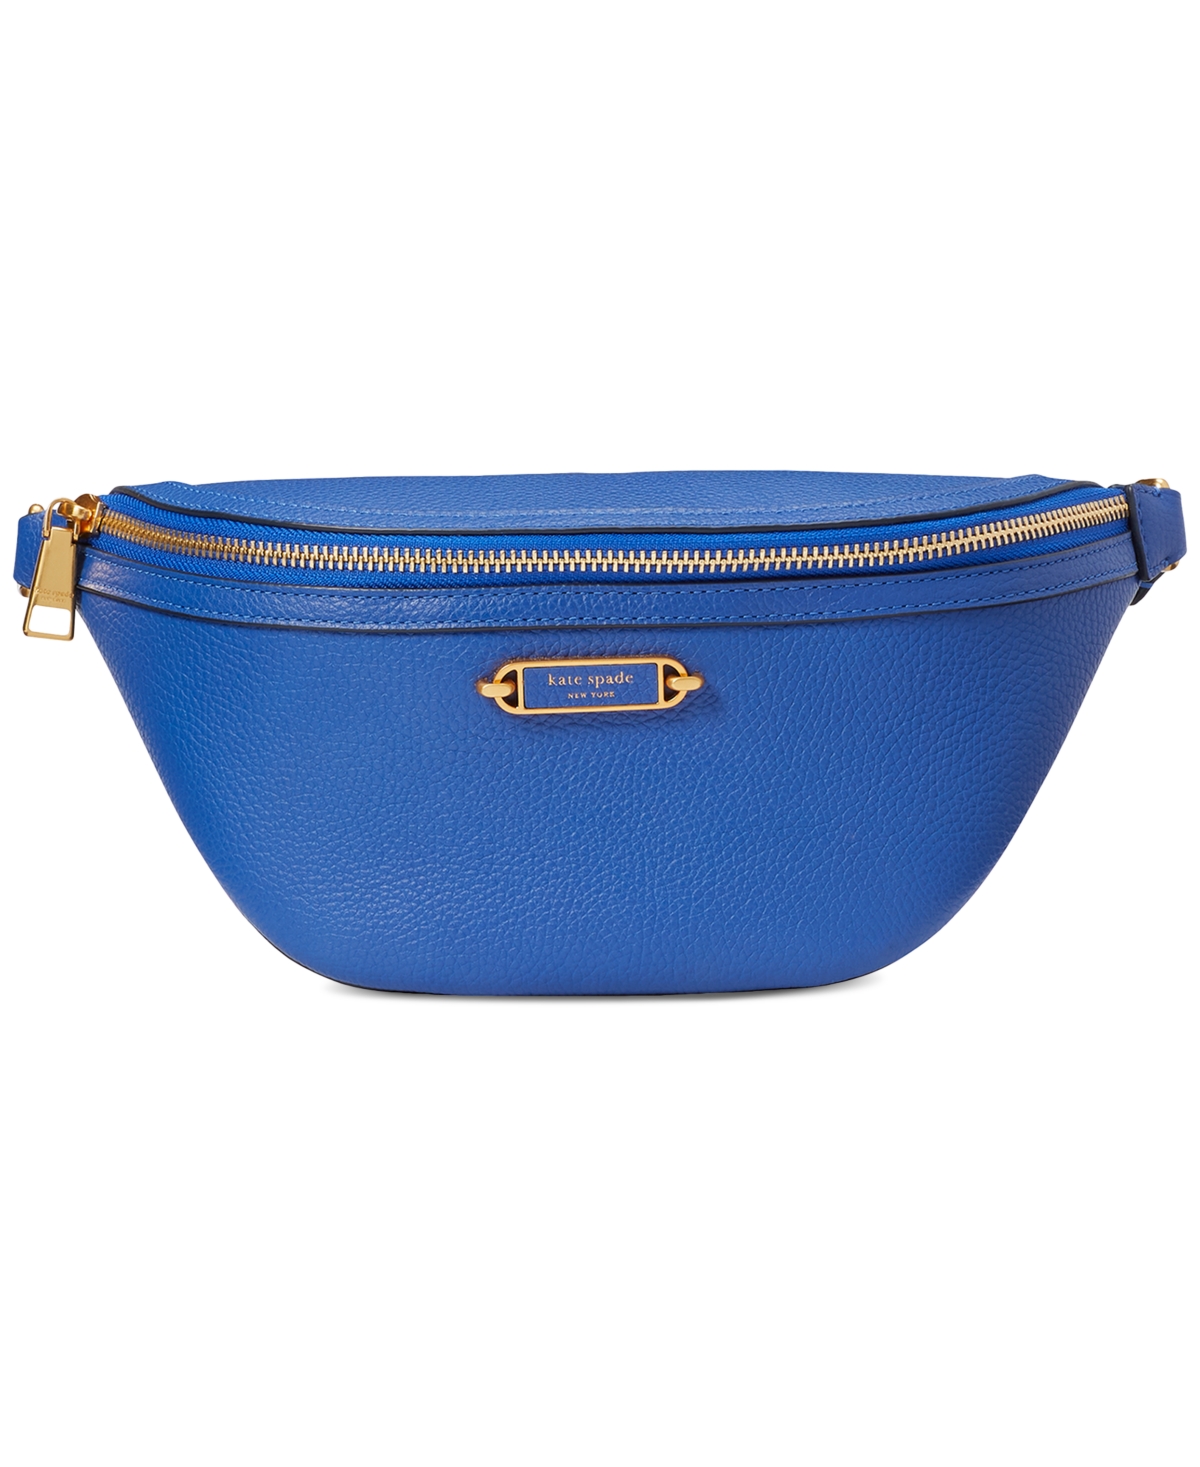 Kate Spade New York Gramercy Pebbled Leather Small Belt Bag In Blueberry